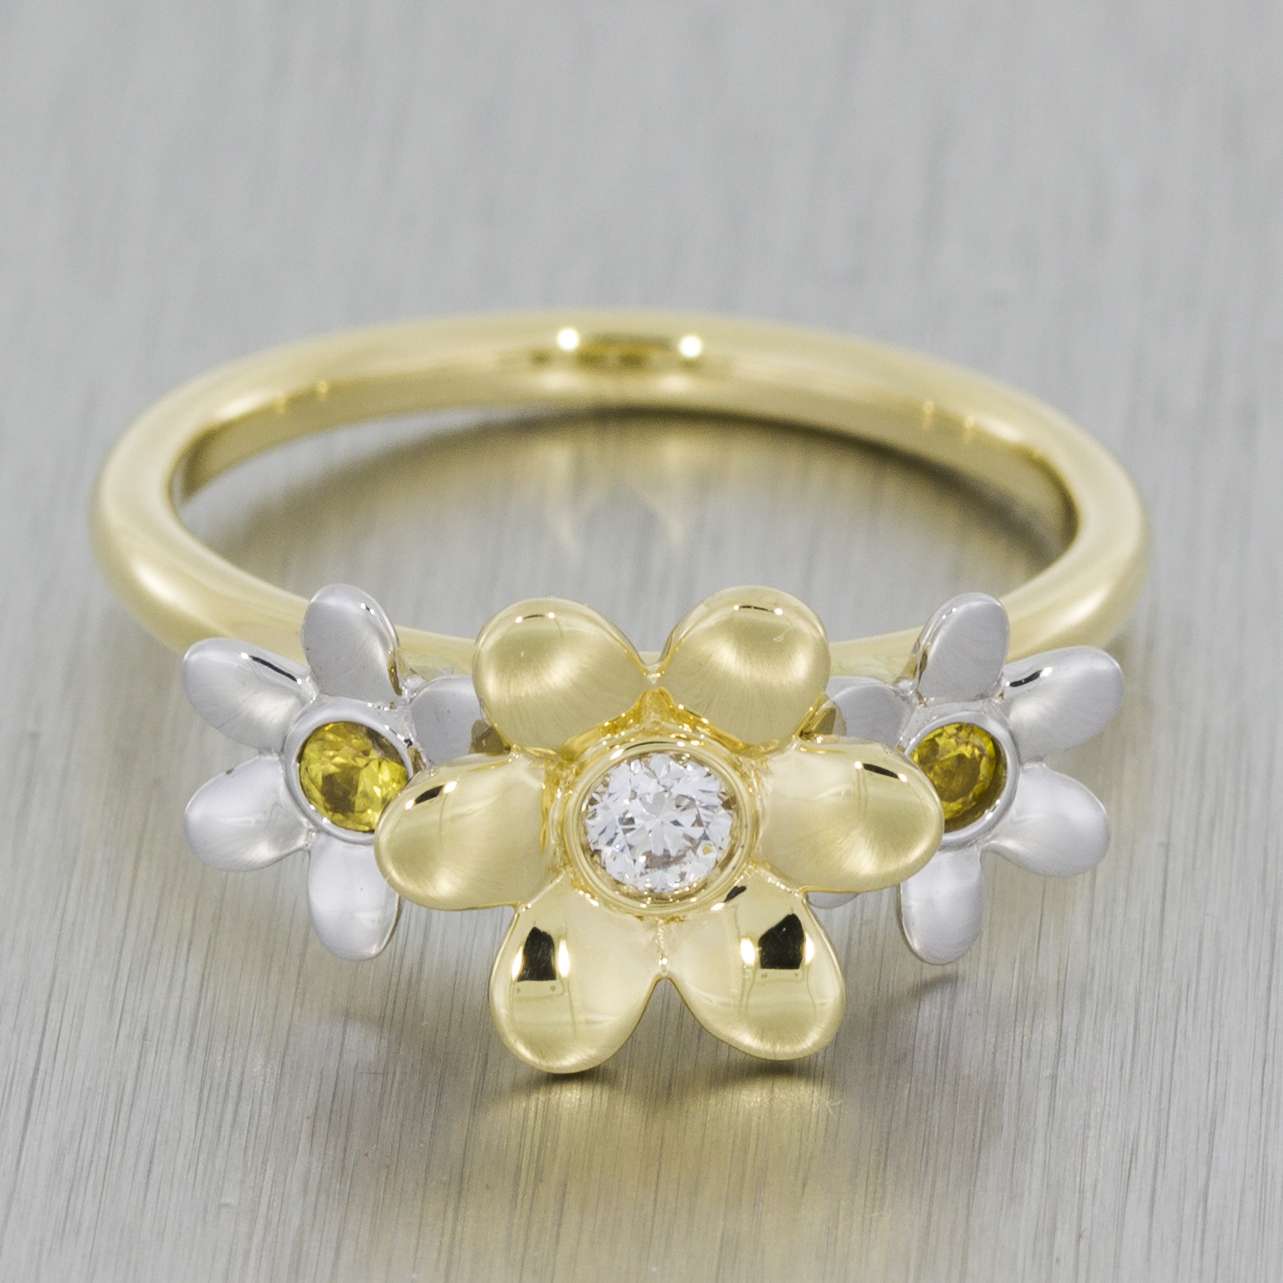 Create Your Own Completely Bespoke, One-of-a-Kind Engagement & Wedding Rings with Durham Rose (3)